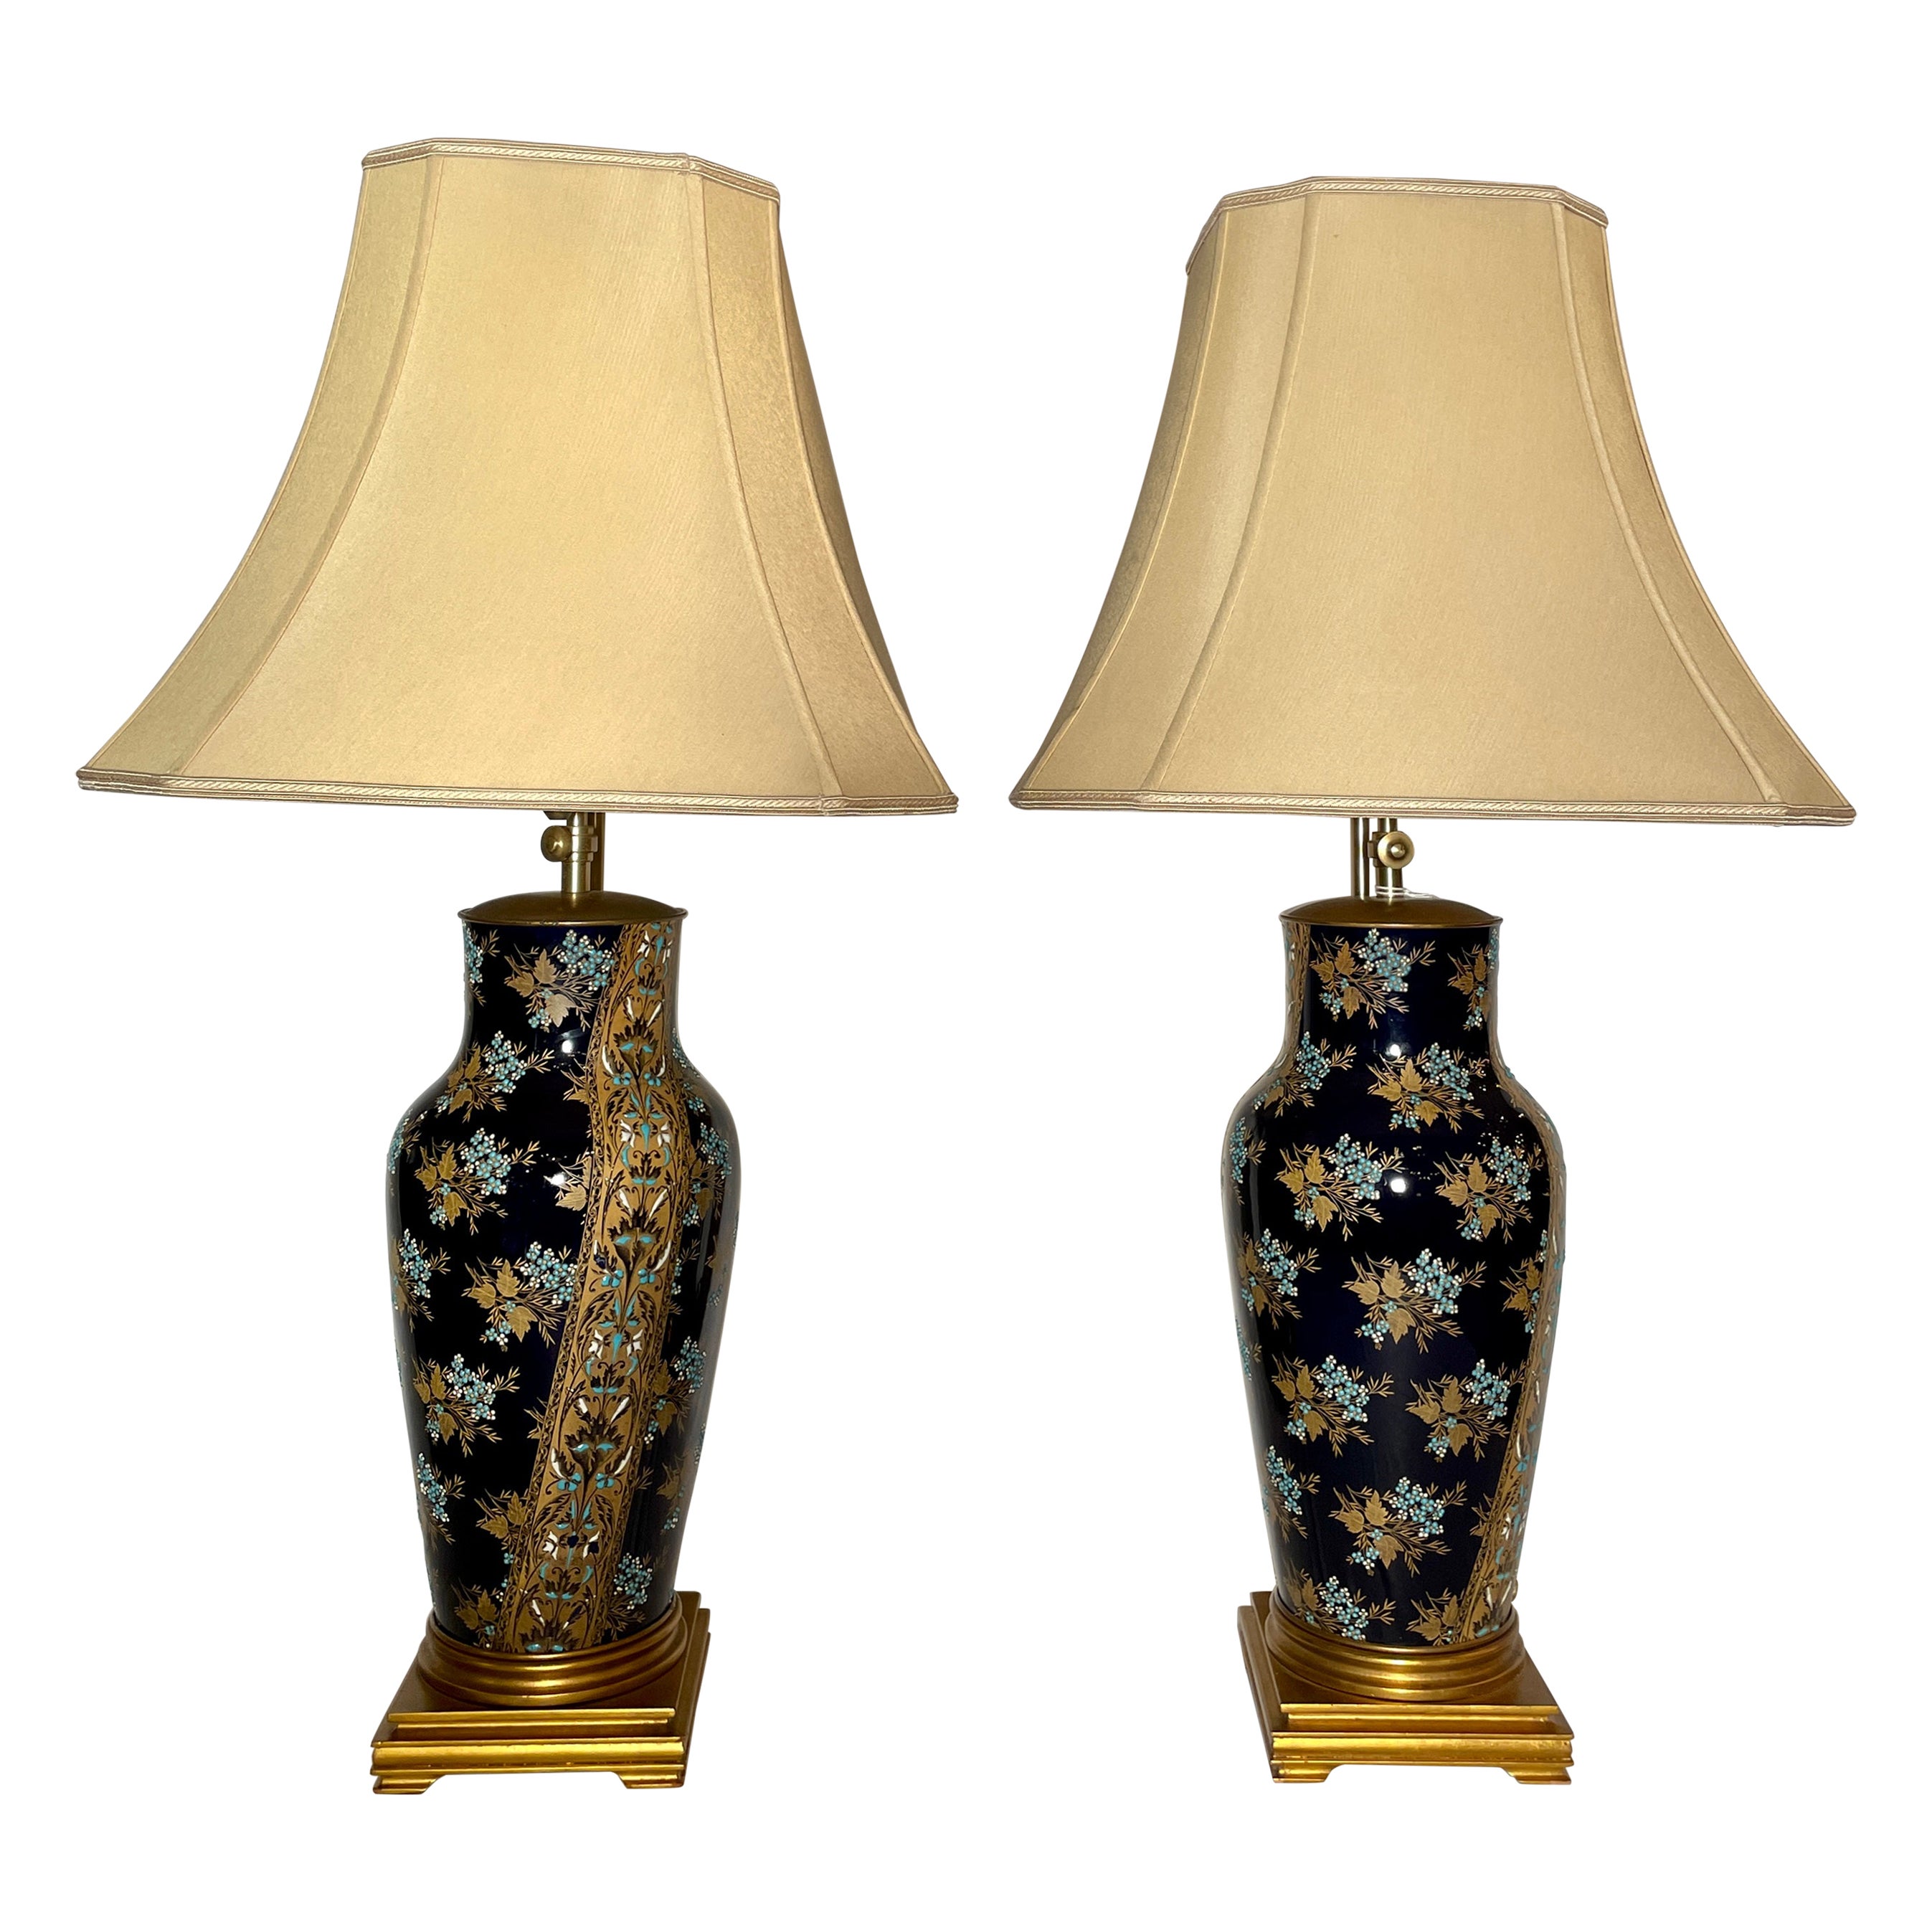 Pair Antique French Chinoiserie Cobalt Blue Enameled Porcelain Lamps, Circa 1910